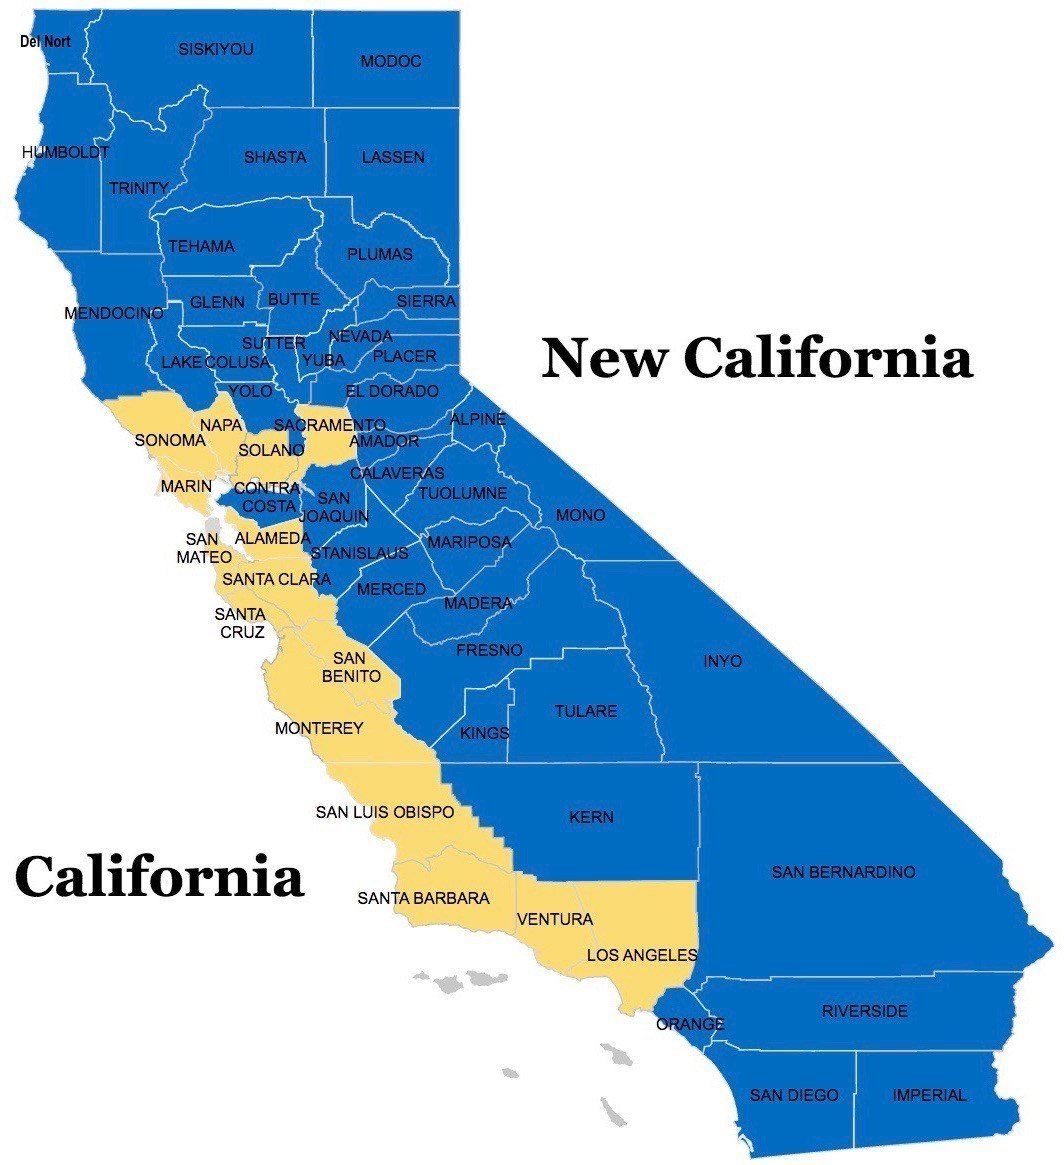 'New California' Could America's 51st State